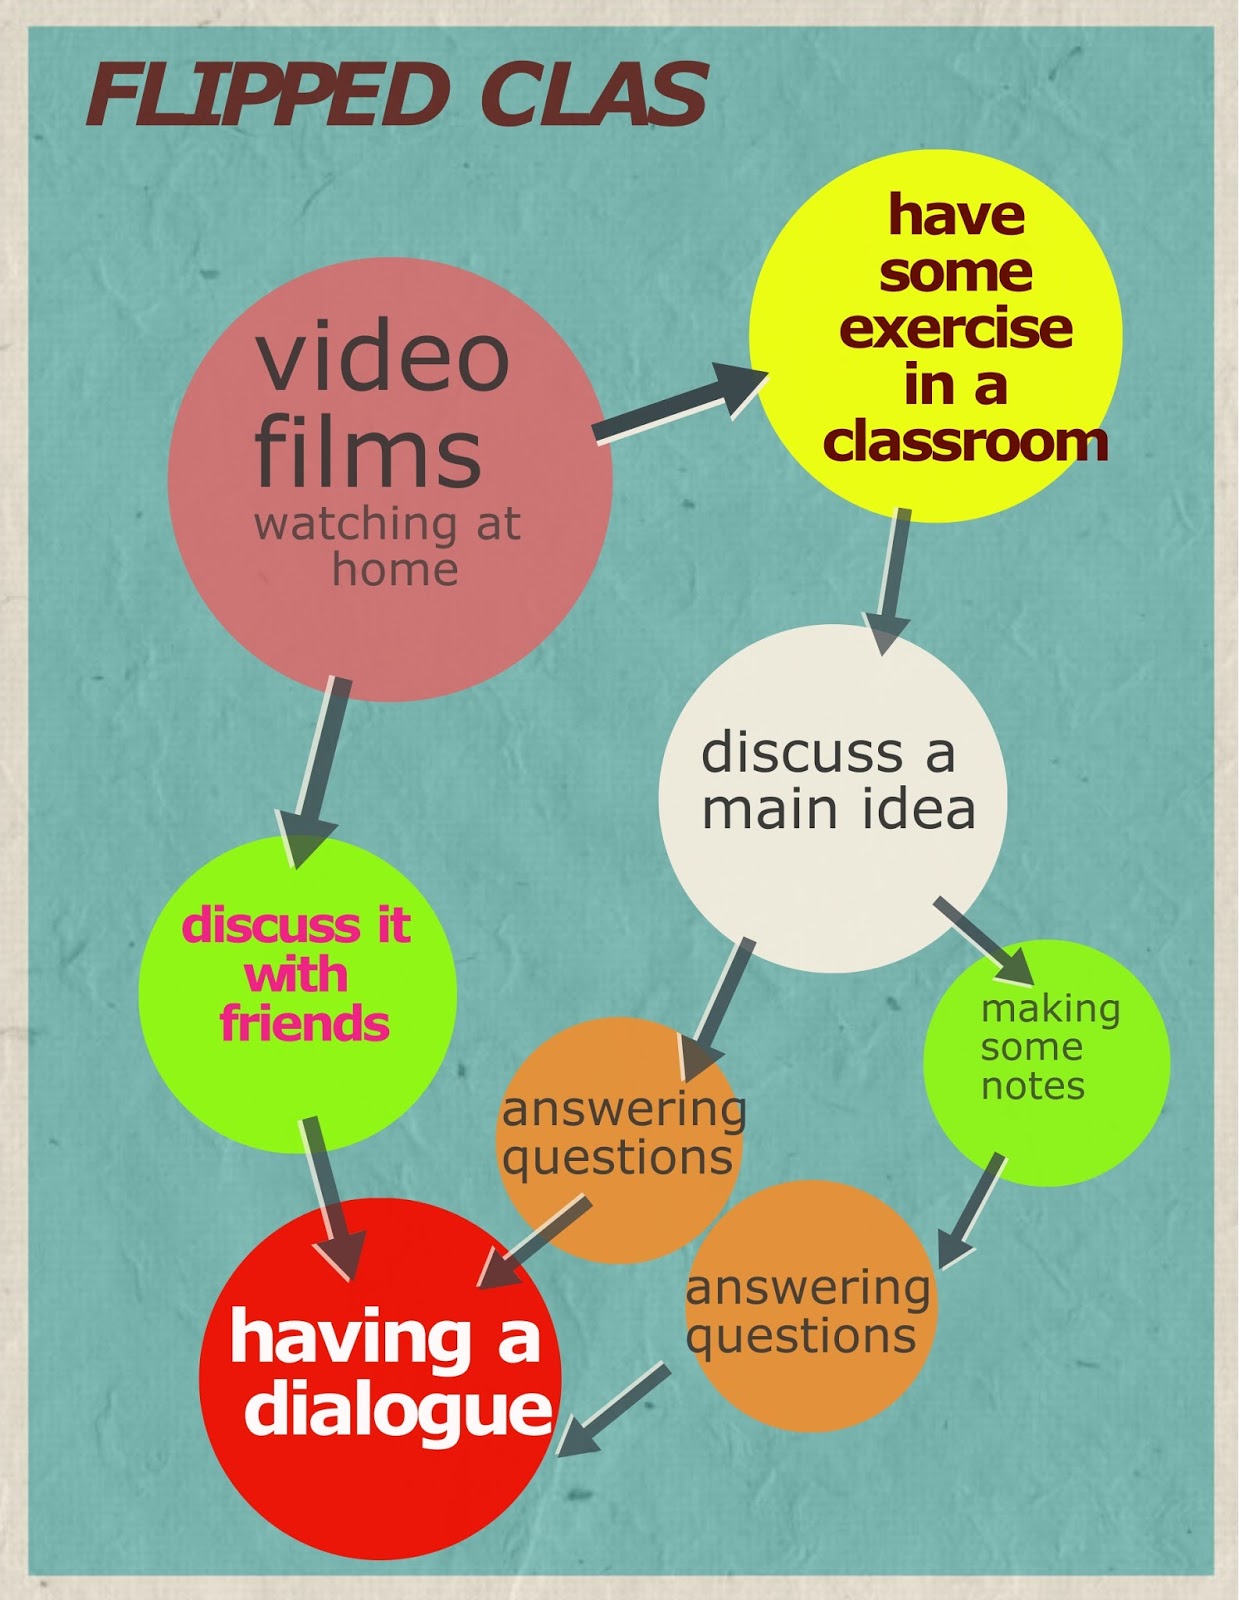 Questions about Flipped Classroom. Flipped Classroom disadvantage. Flipped Classroom questions. Classroom questions